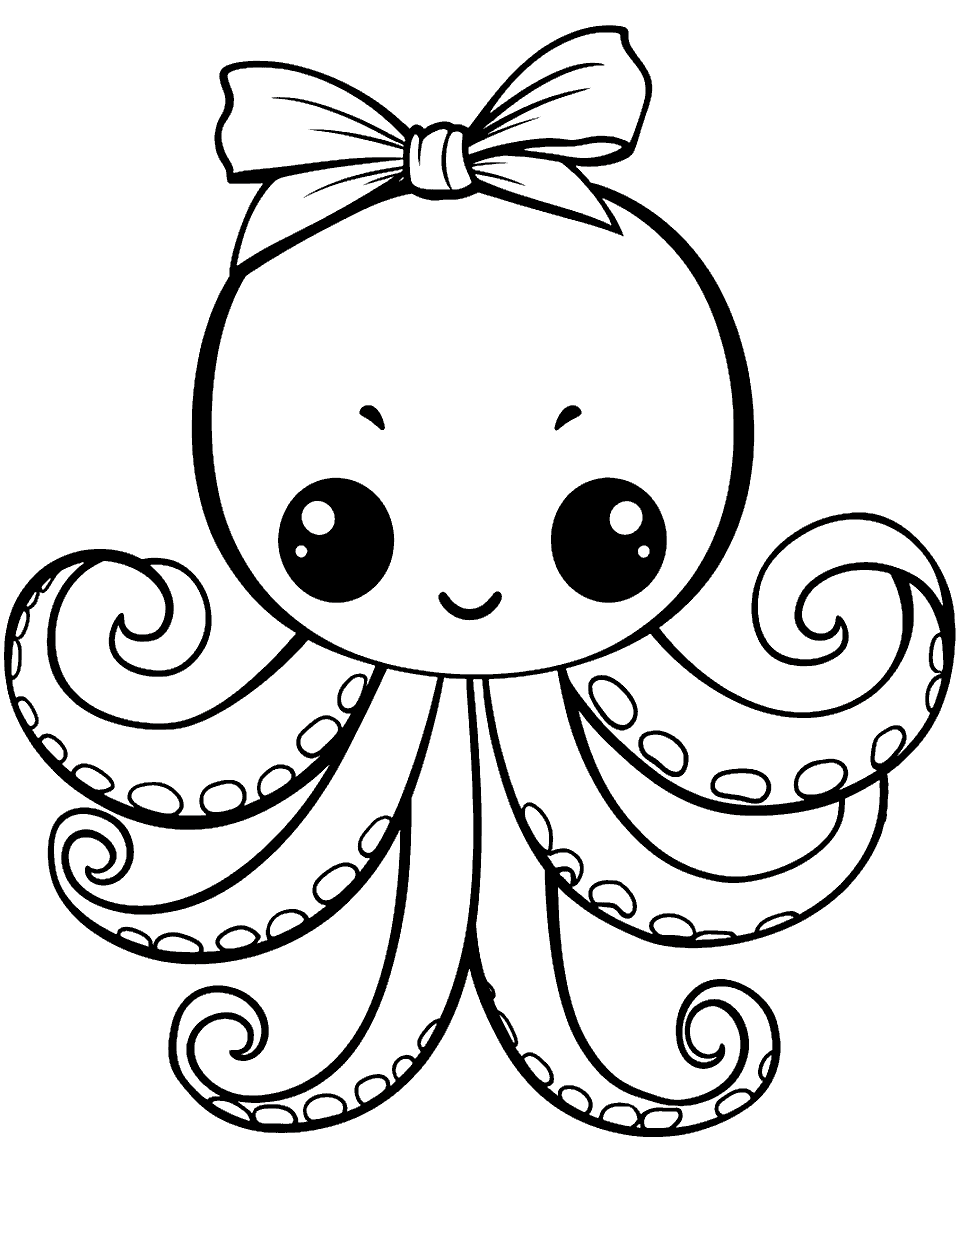 Kawaii Octopus with a Bow Coloring Page - A super cute kawaii-style octopus wearing a big bow on its head.